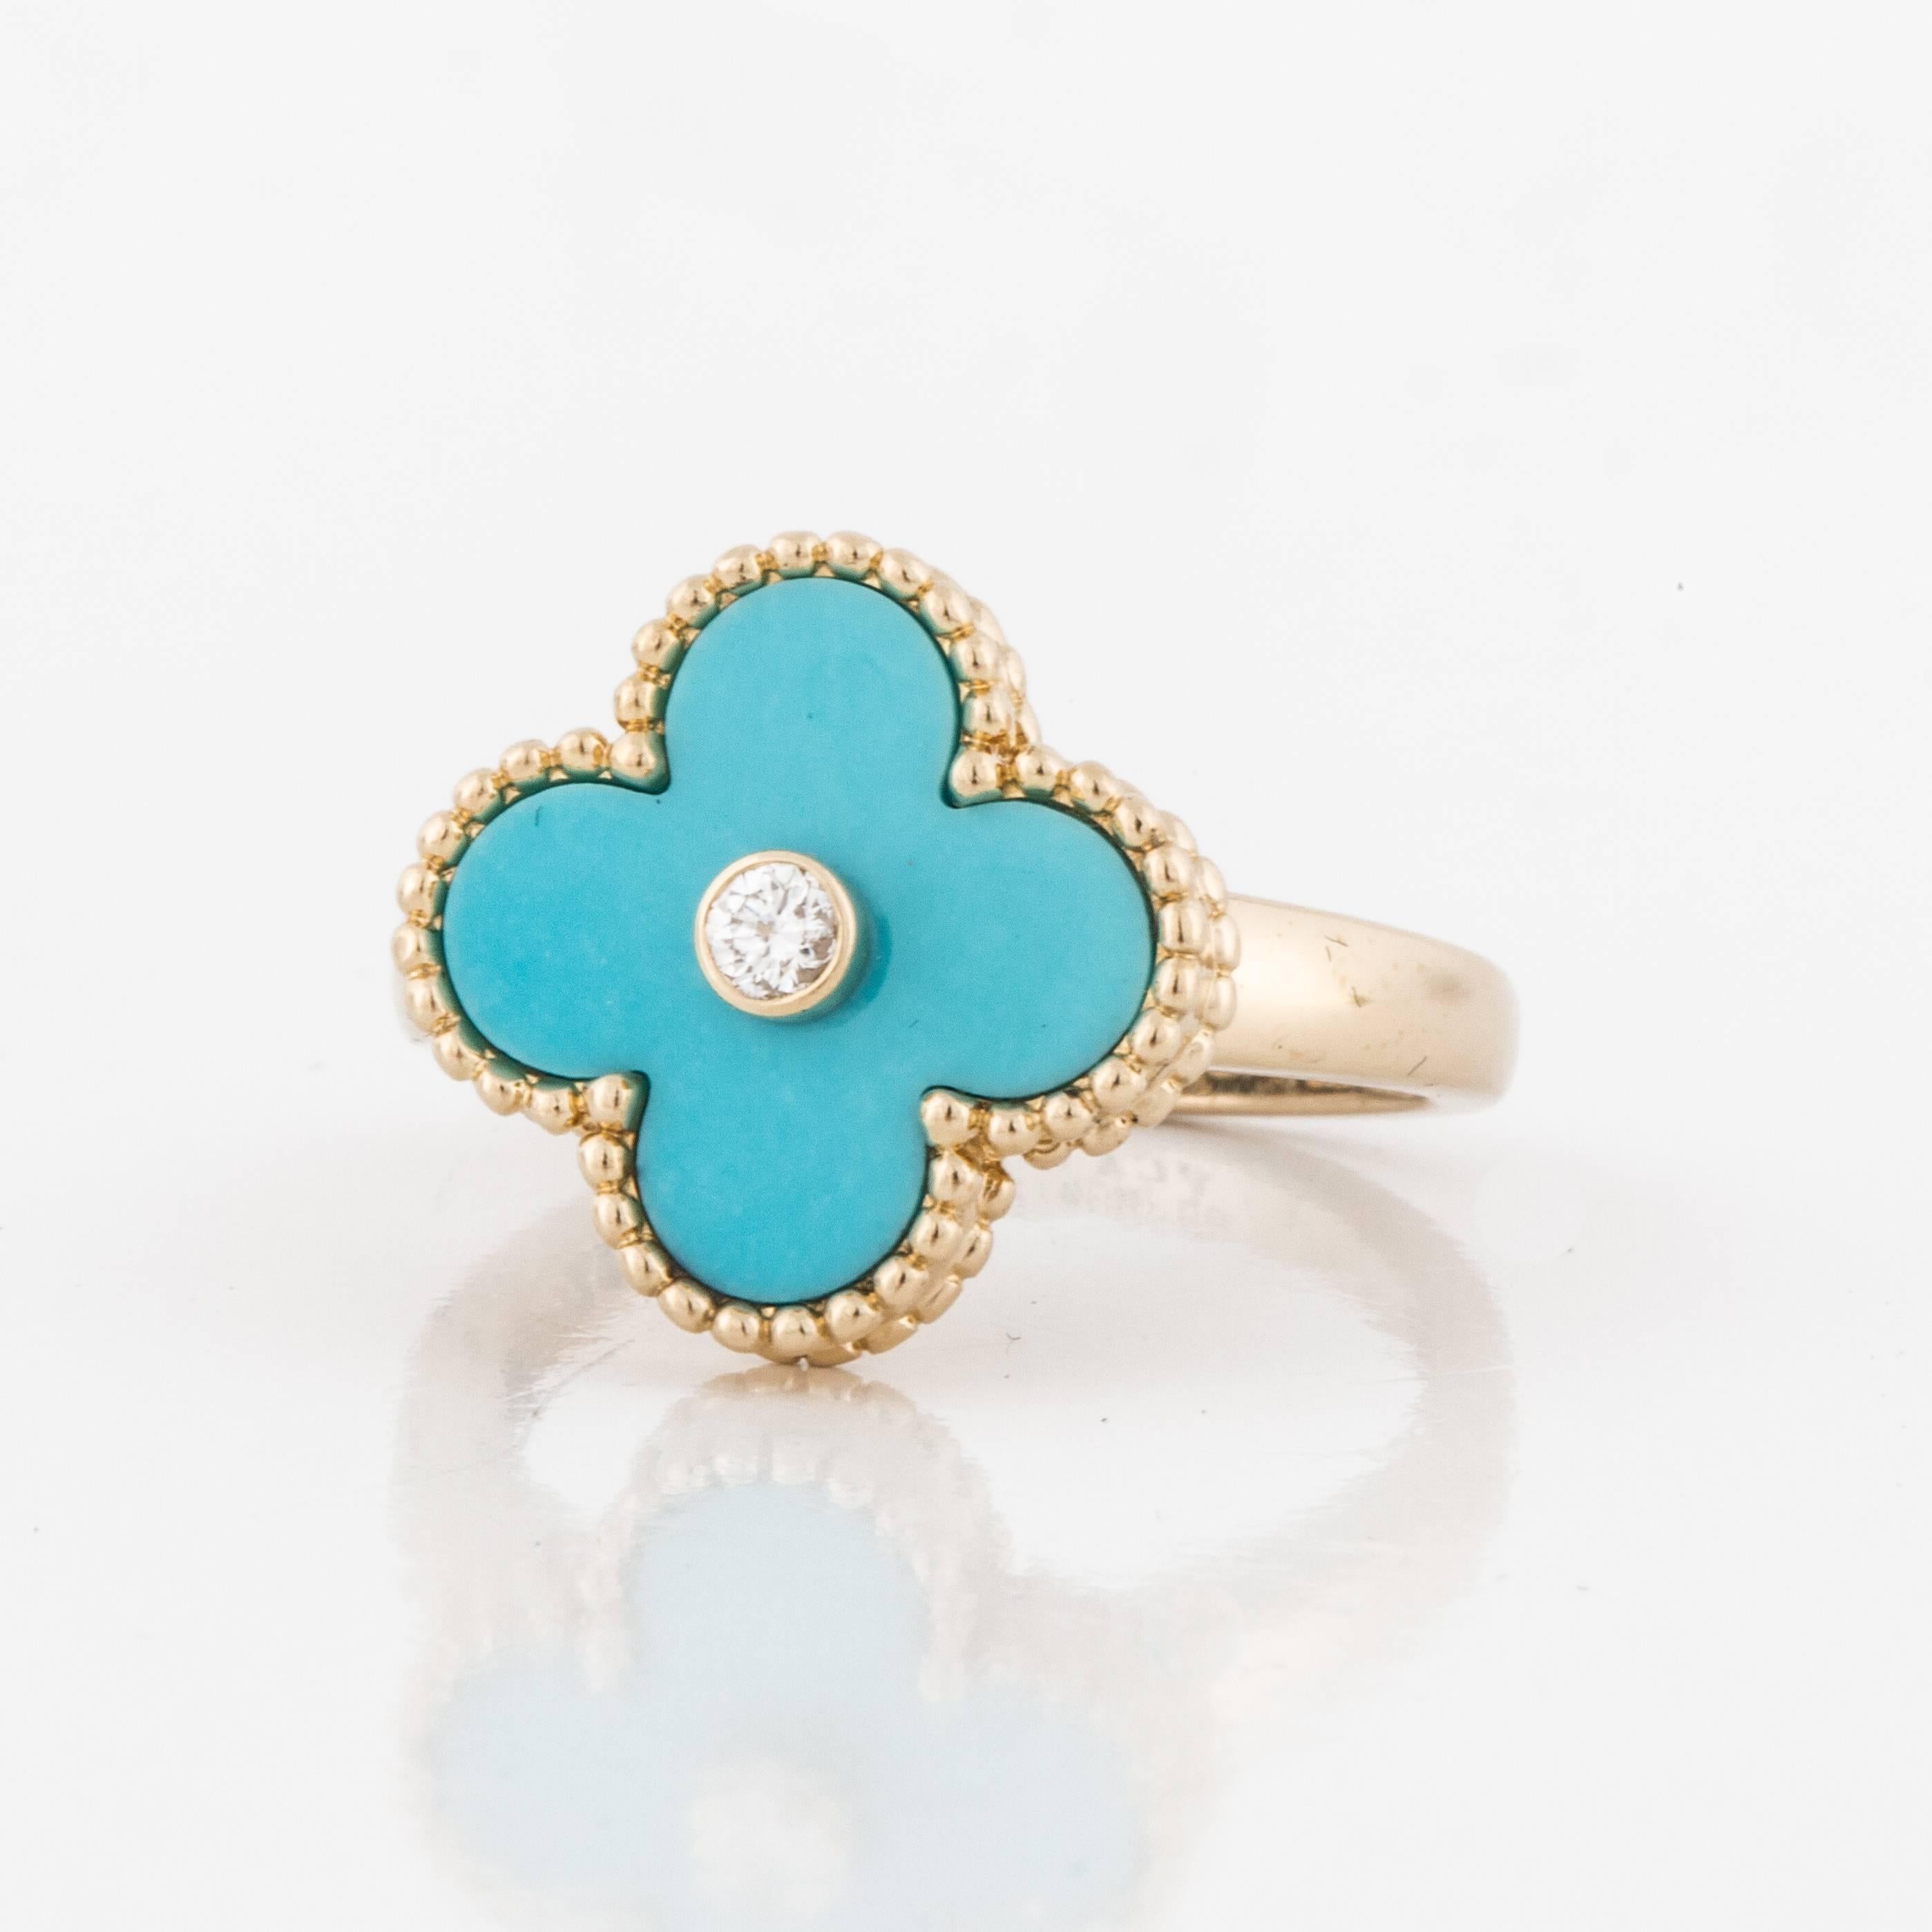 Yellow gold ring marked "VCA G750 52 JBO91205" on the inside. From the Alhambra series, this ring features a carved turquoise stone with a diamond in the center.  The diamond is .06 carats and it is D-F in color and VVS1 in clarity.